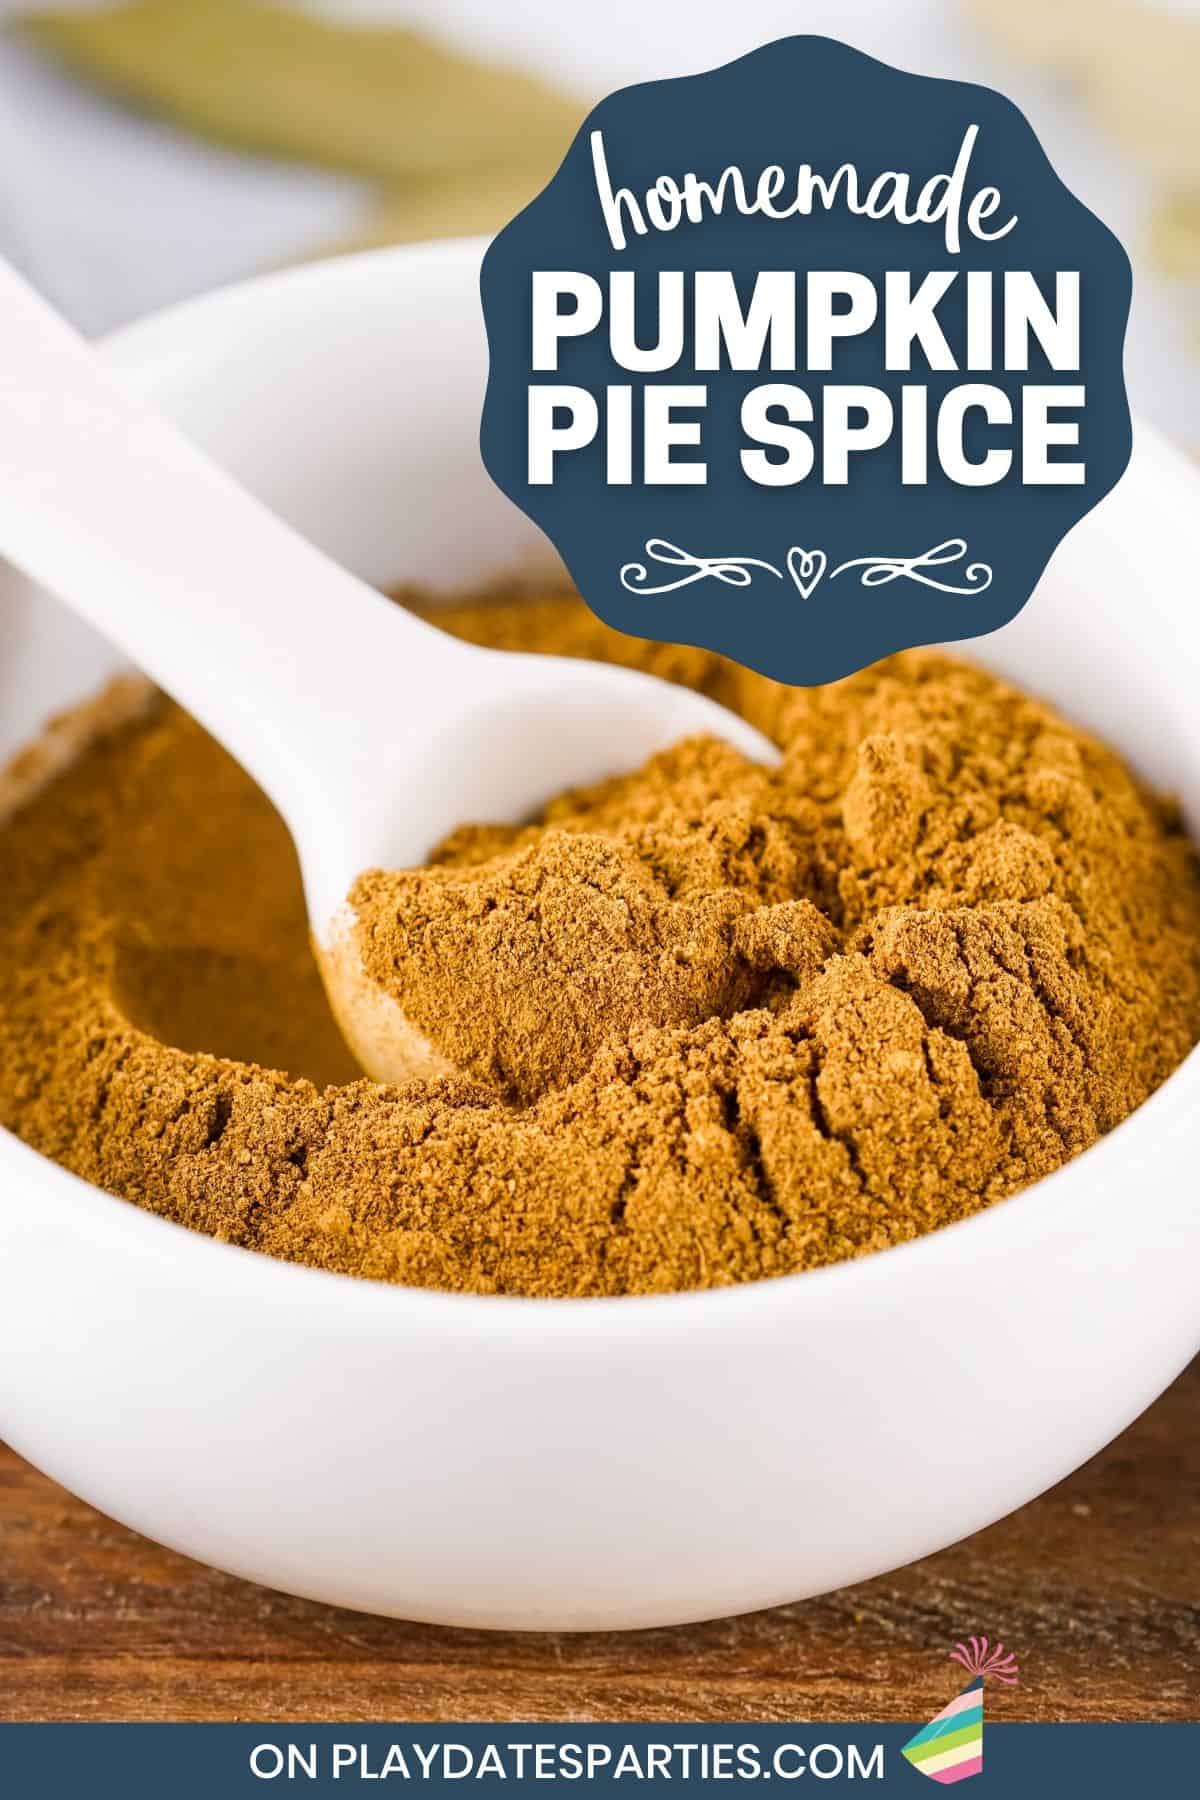 A bowl filled with homemade pumpkin pie spice substitute.